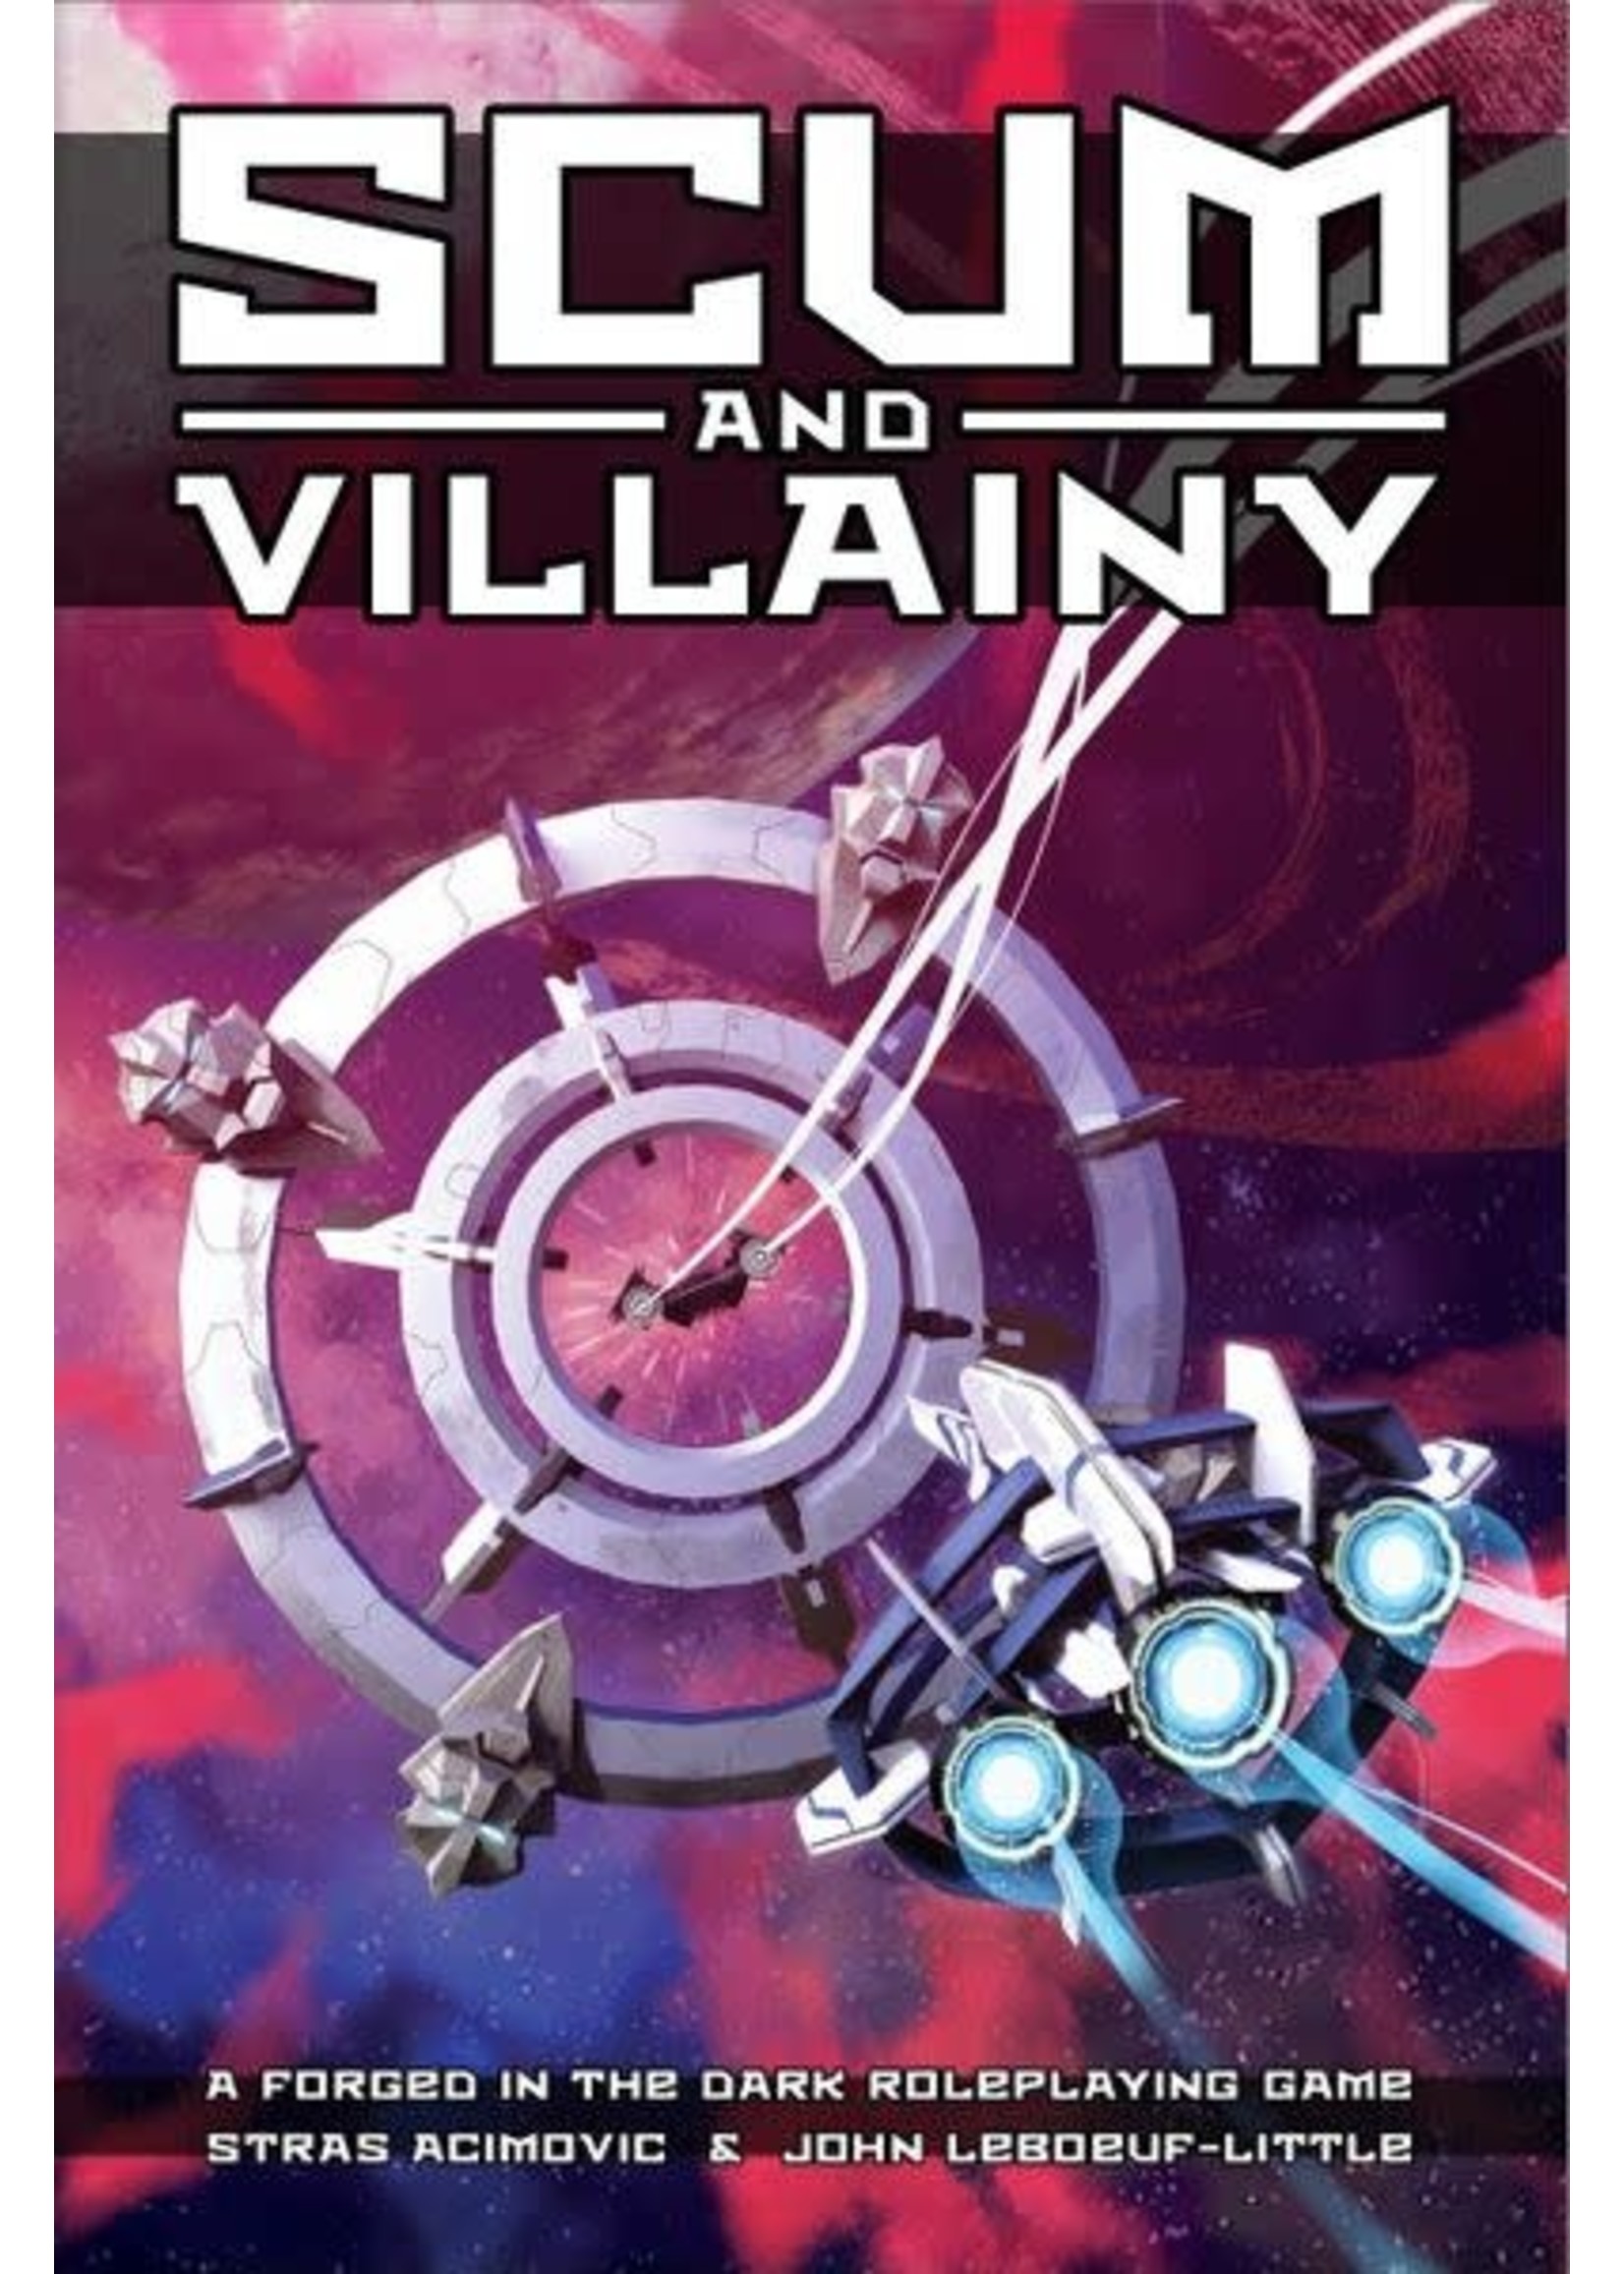 star wars role playing game scum and.villainy